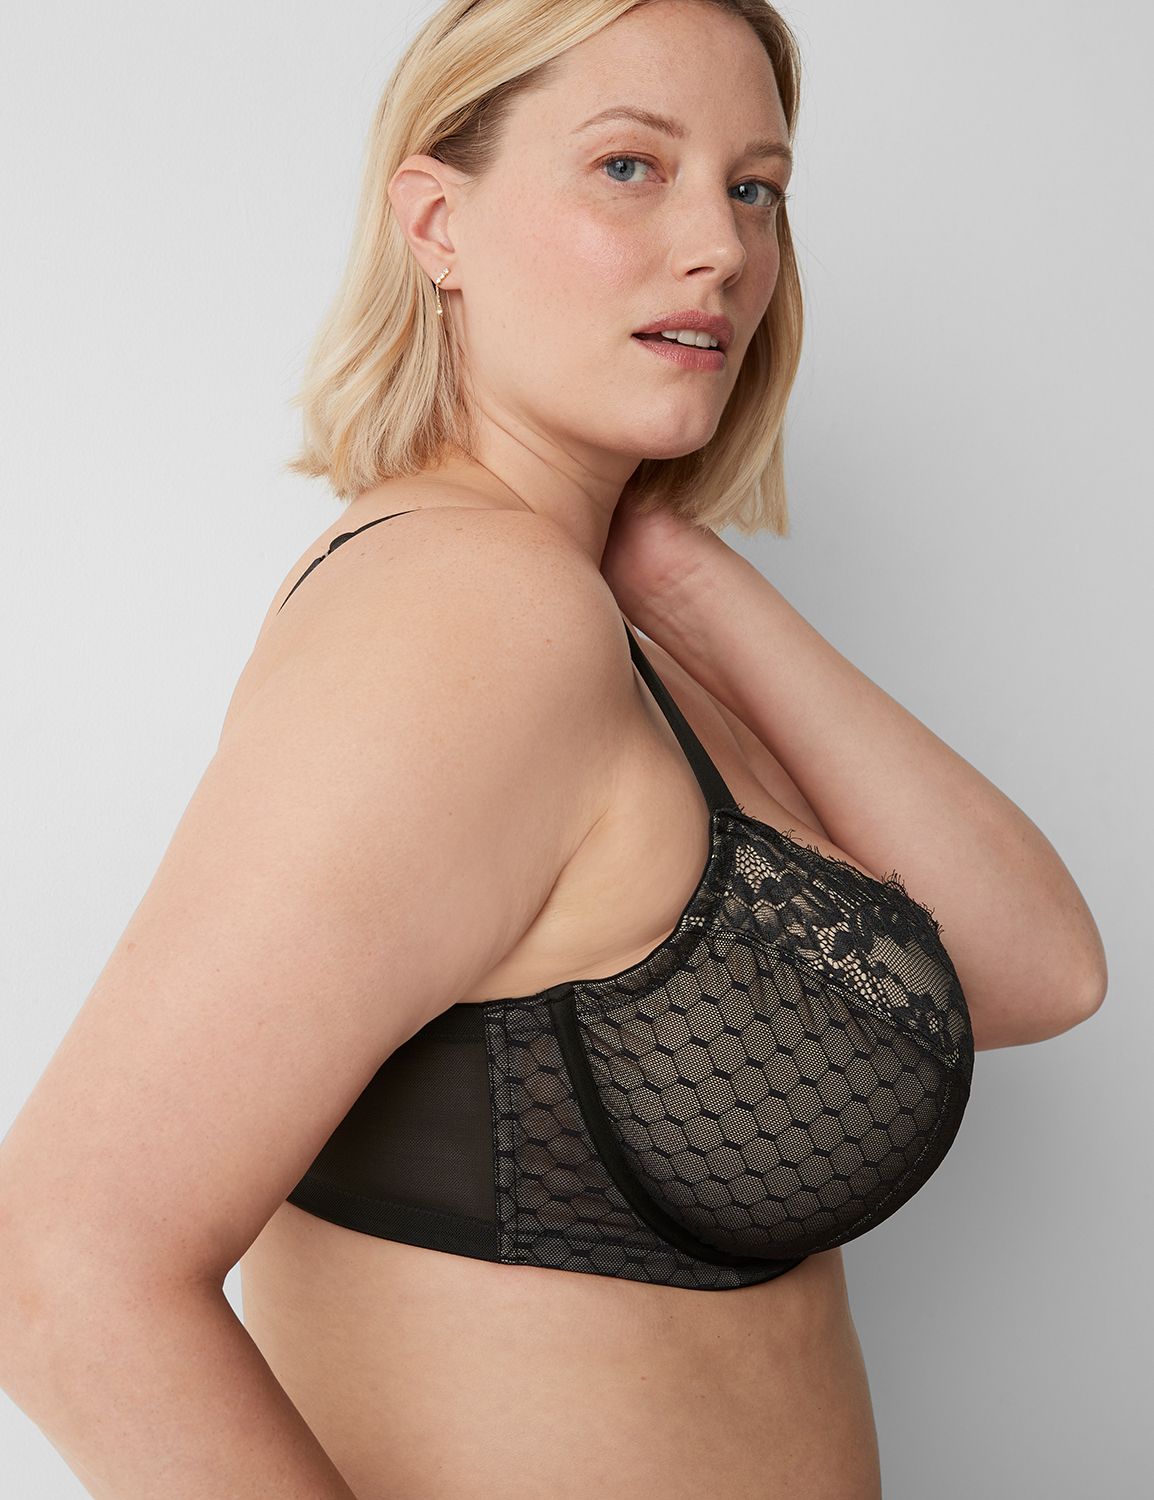 April 2020s Bralette (Plus Size) – Layered With Lace